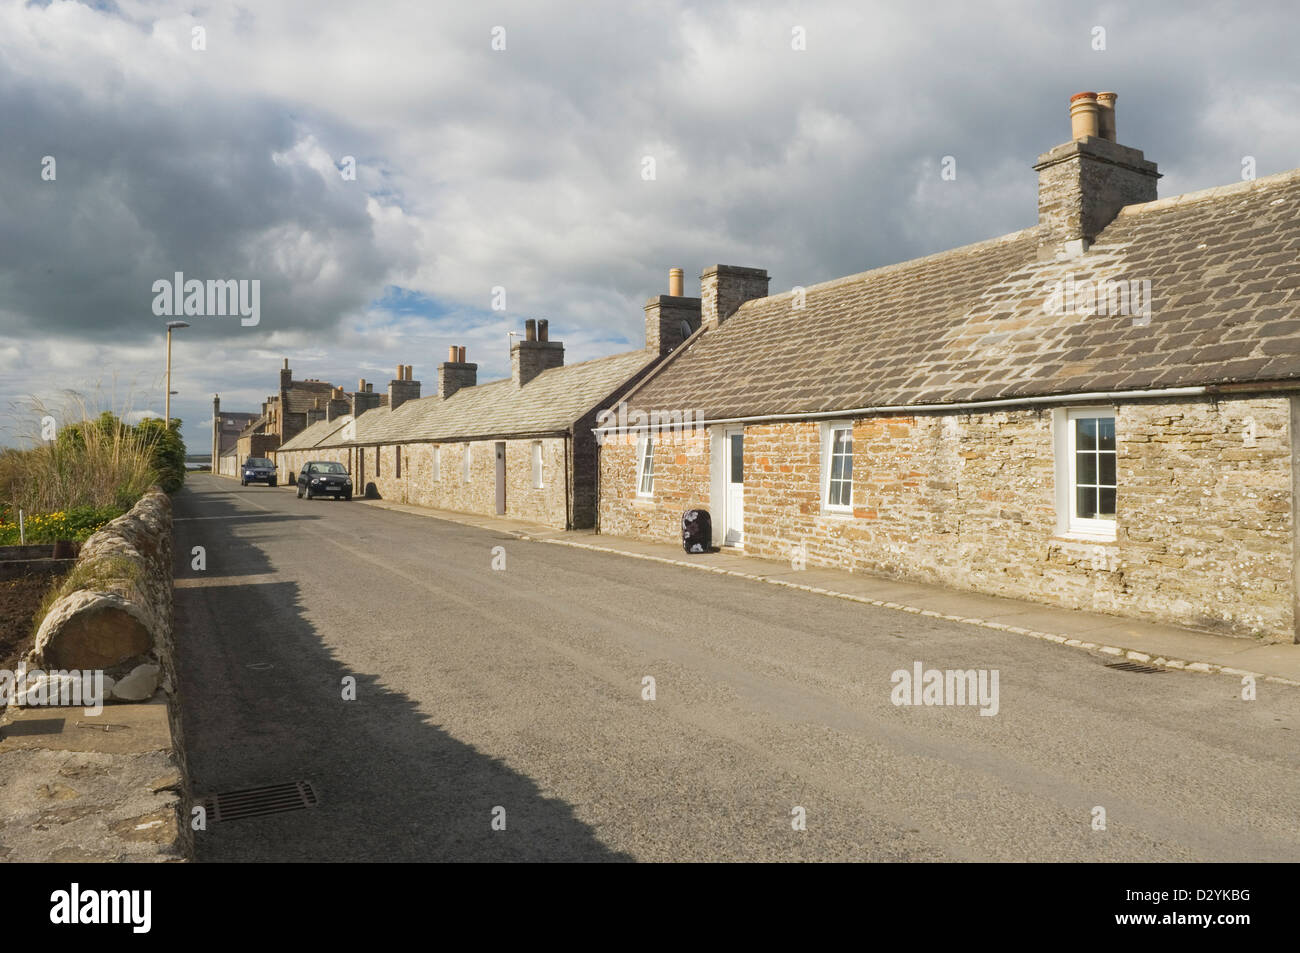 Balfour village on the island of Shapinsay, Orkney Islands, Scotland. Stock Photo